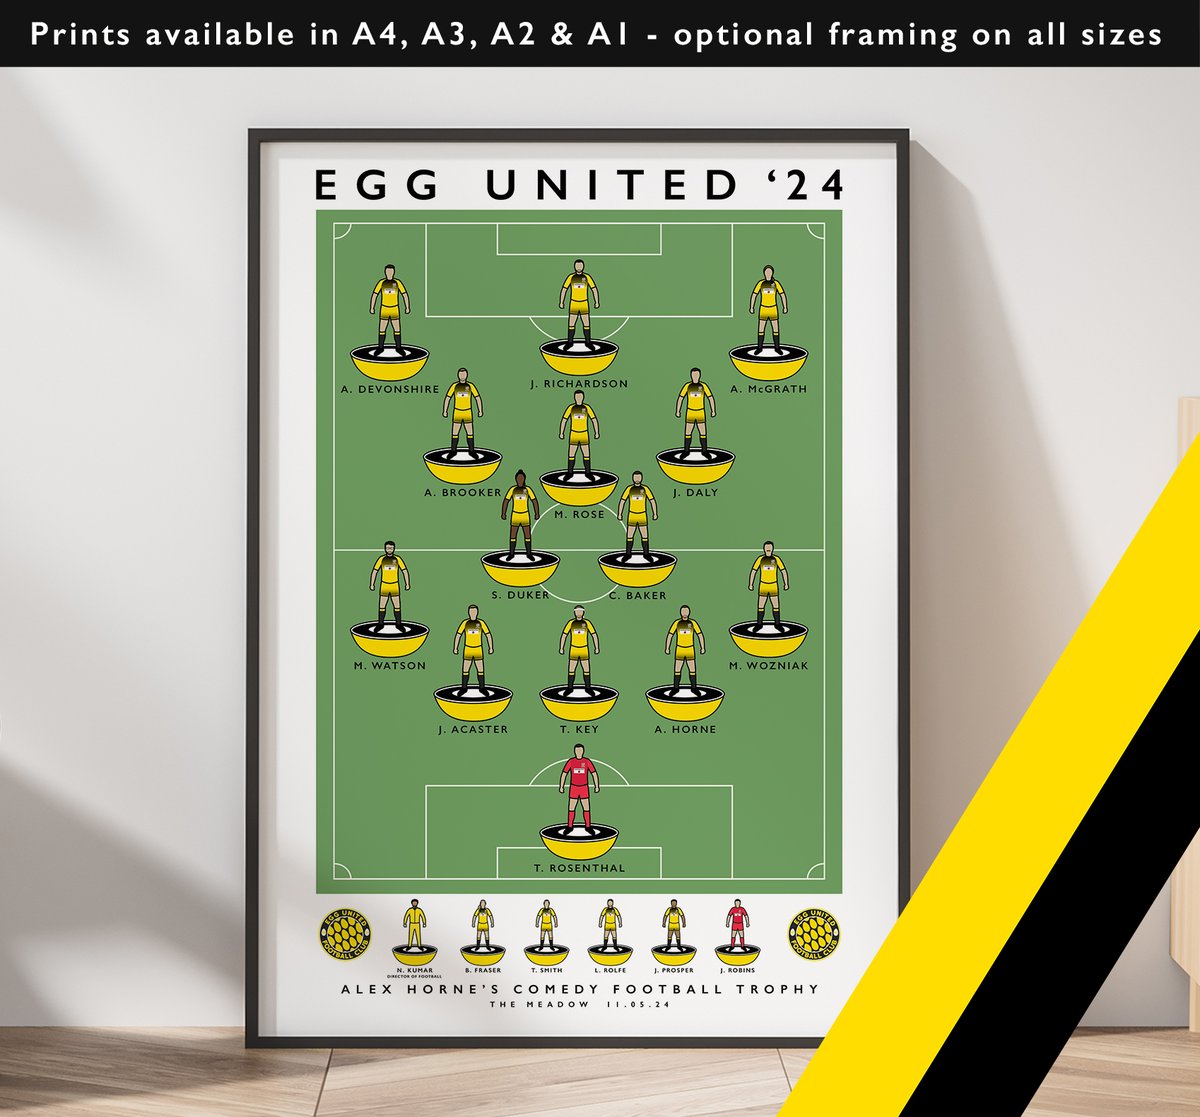 Amazing day at The Meadow yesterday for Alex Horne's Comedy Football Trophy 2024 Prints at the ground sold out fast, but are still available here (with 50% of proceeds going to @cheshamutdfc): matthewjiwood.com/alex-horne/egg… Congratulations Egg United! @AlexHorne @taskmaster